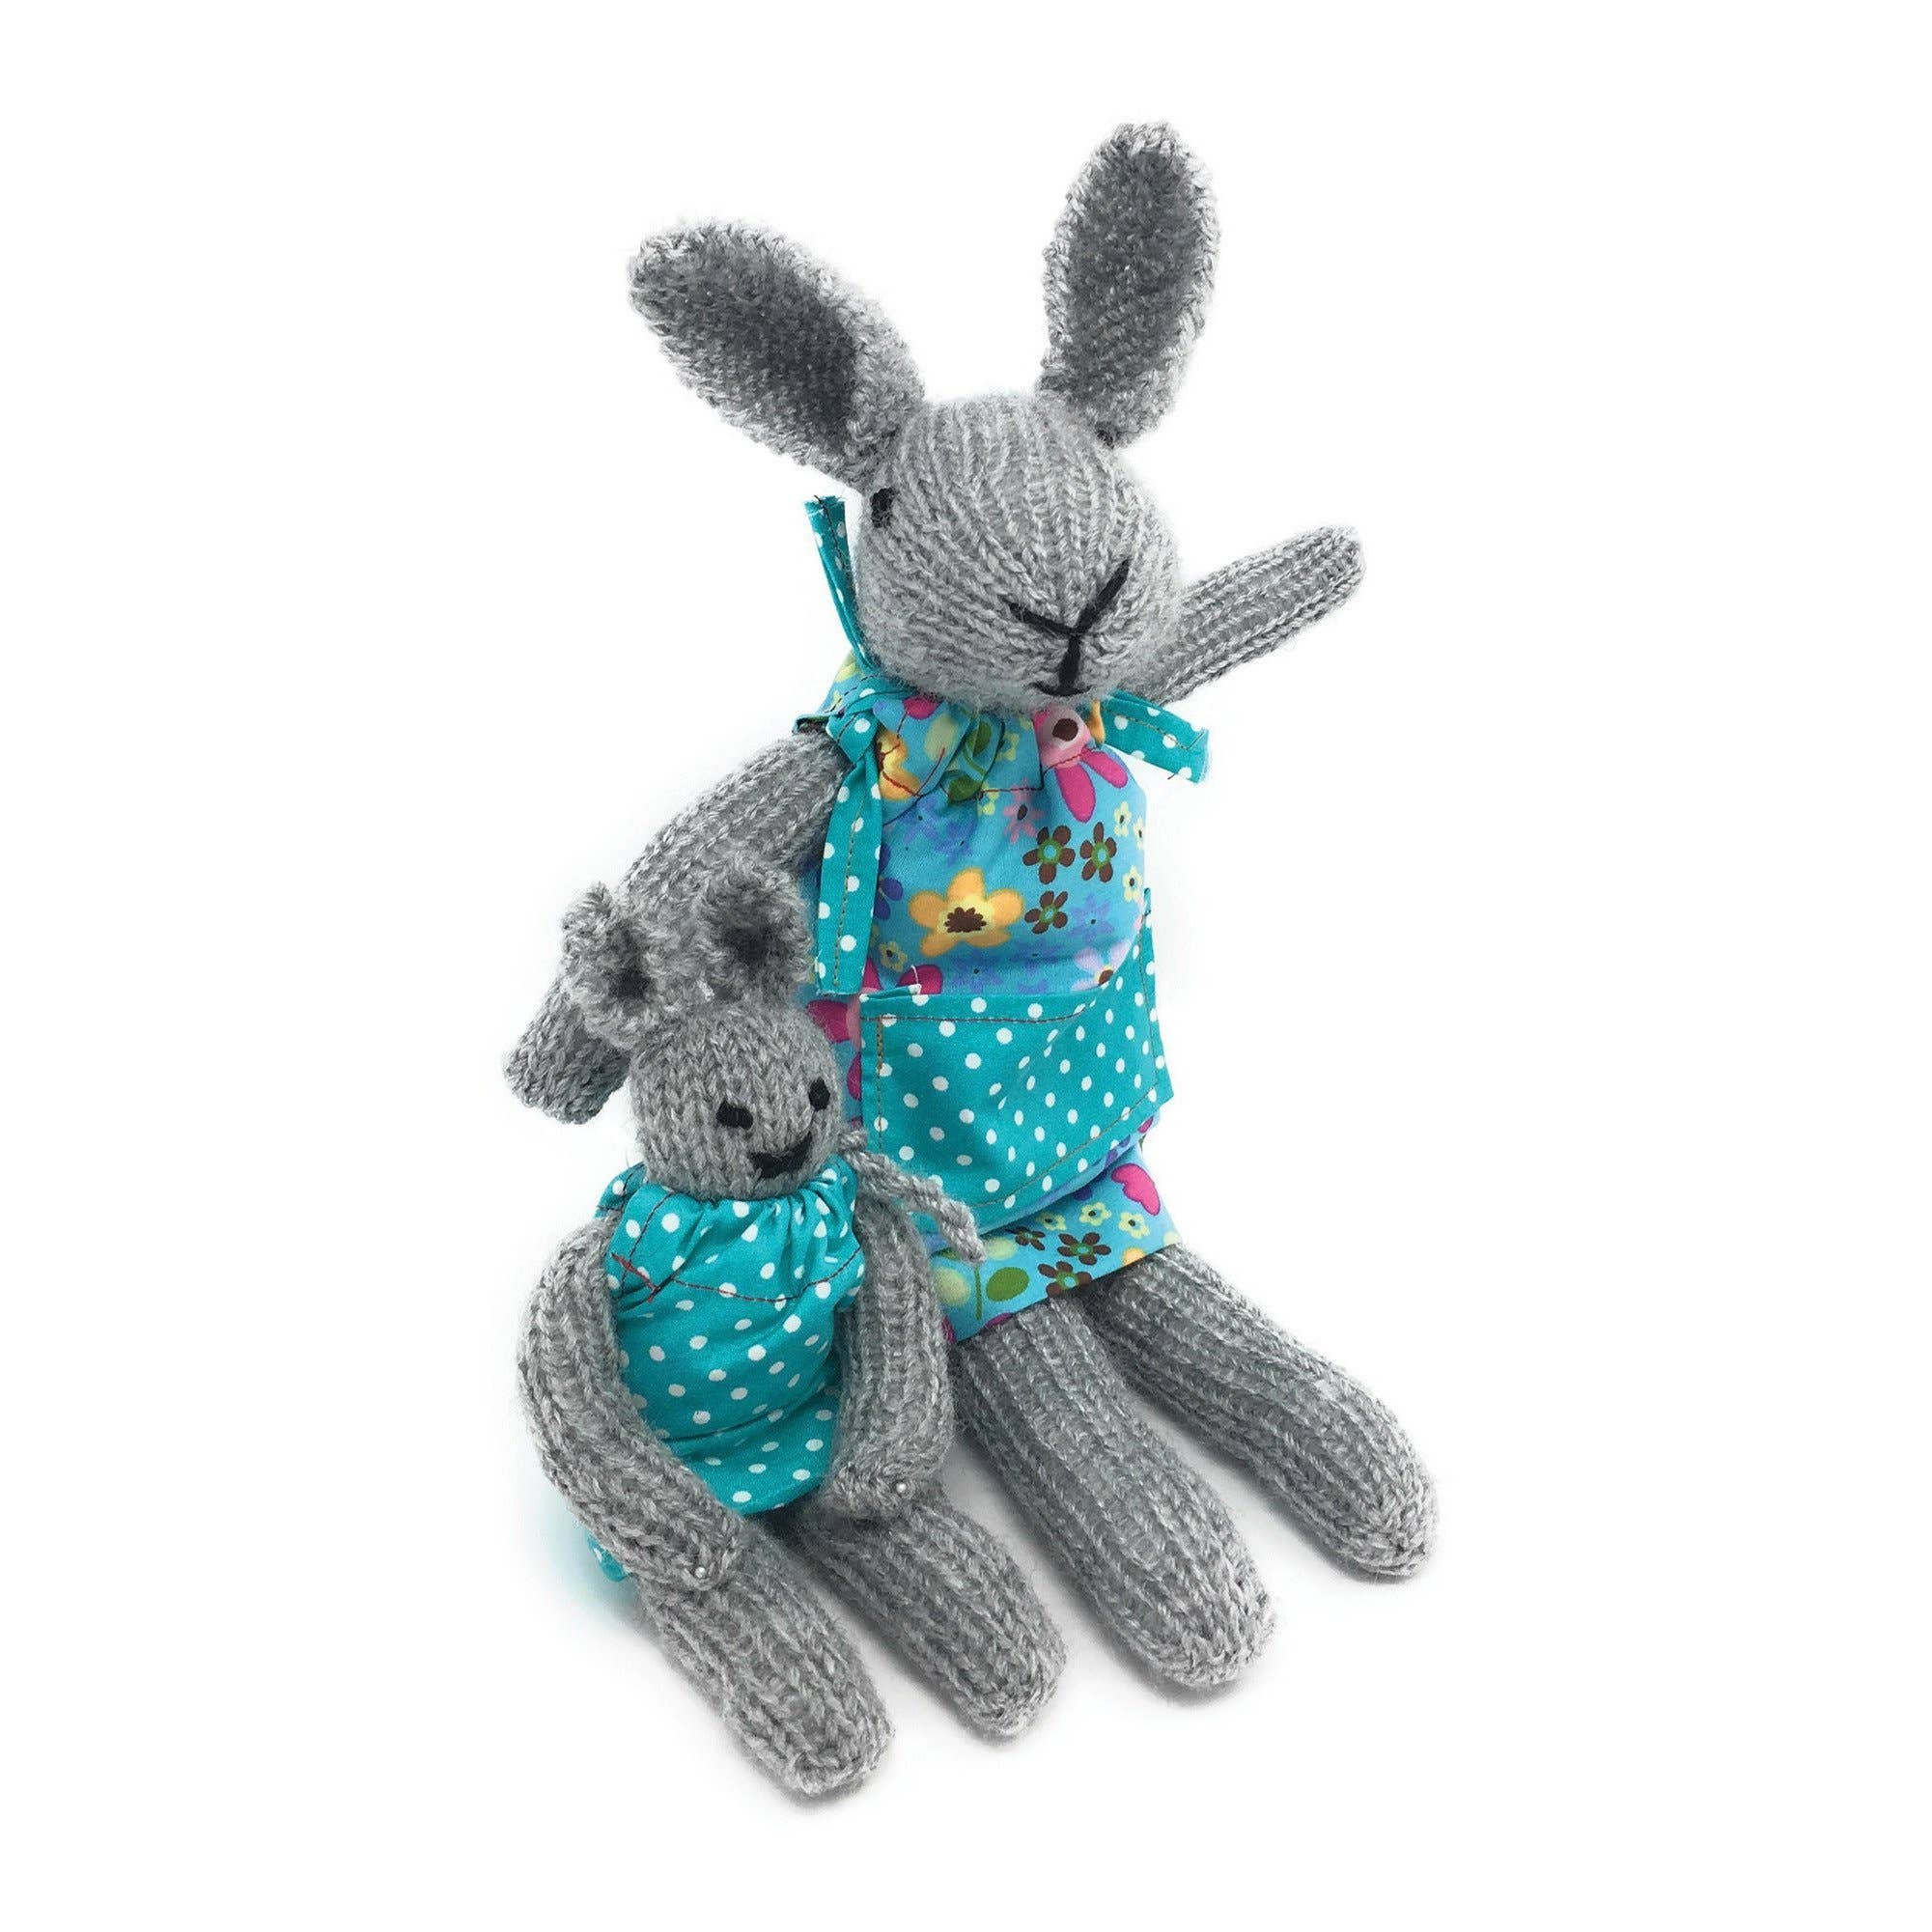 The Crafty Kit Company - Knit Your Own Bunnies Kit